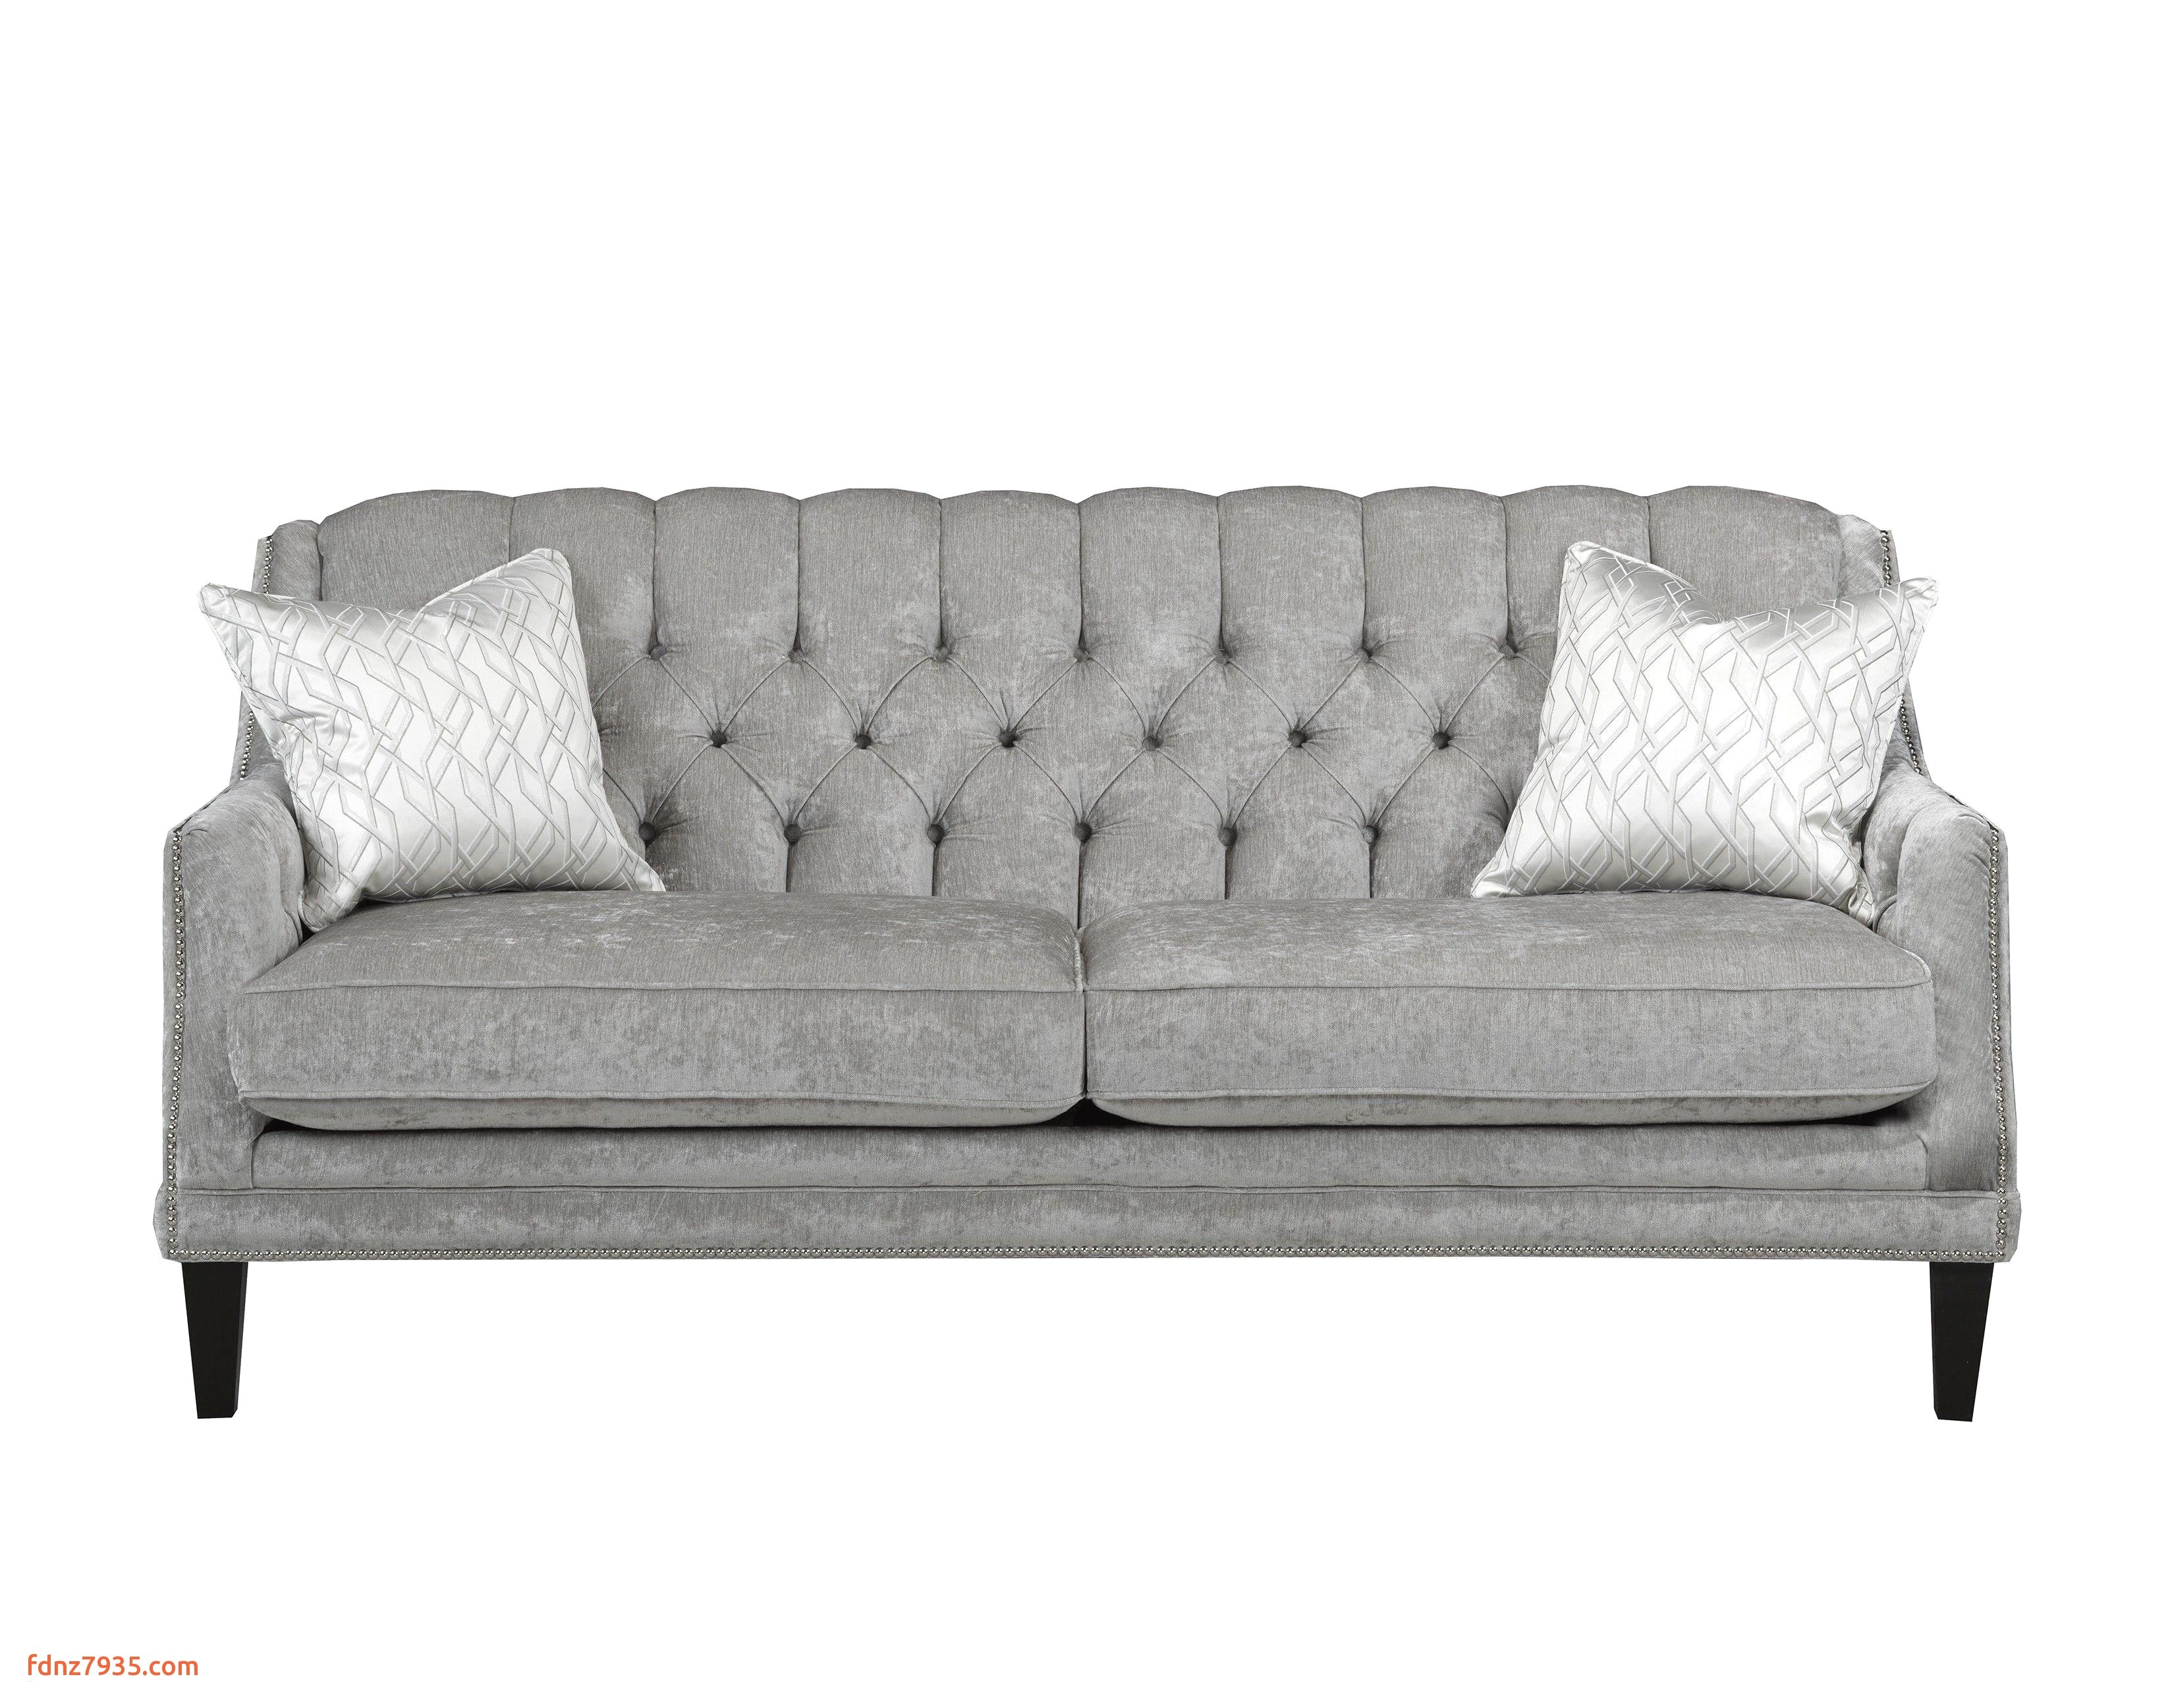 jcpenney patio cushions fantastic furniture sleeper loveseat inspirational wicker outdoor sofa 0d jcpenney patio cushions